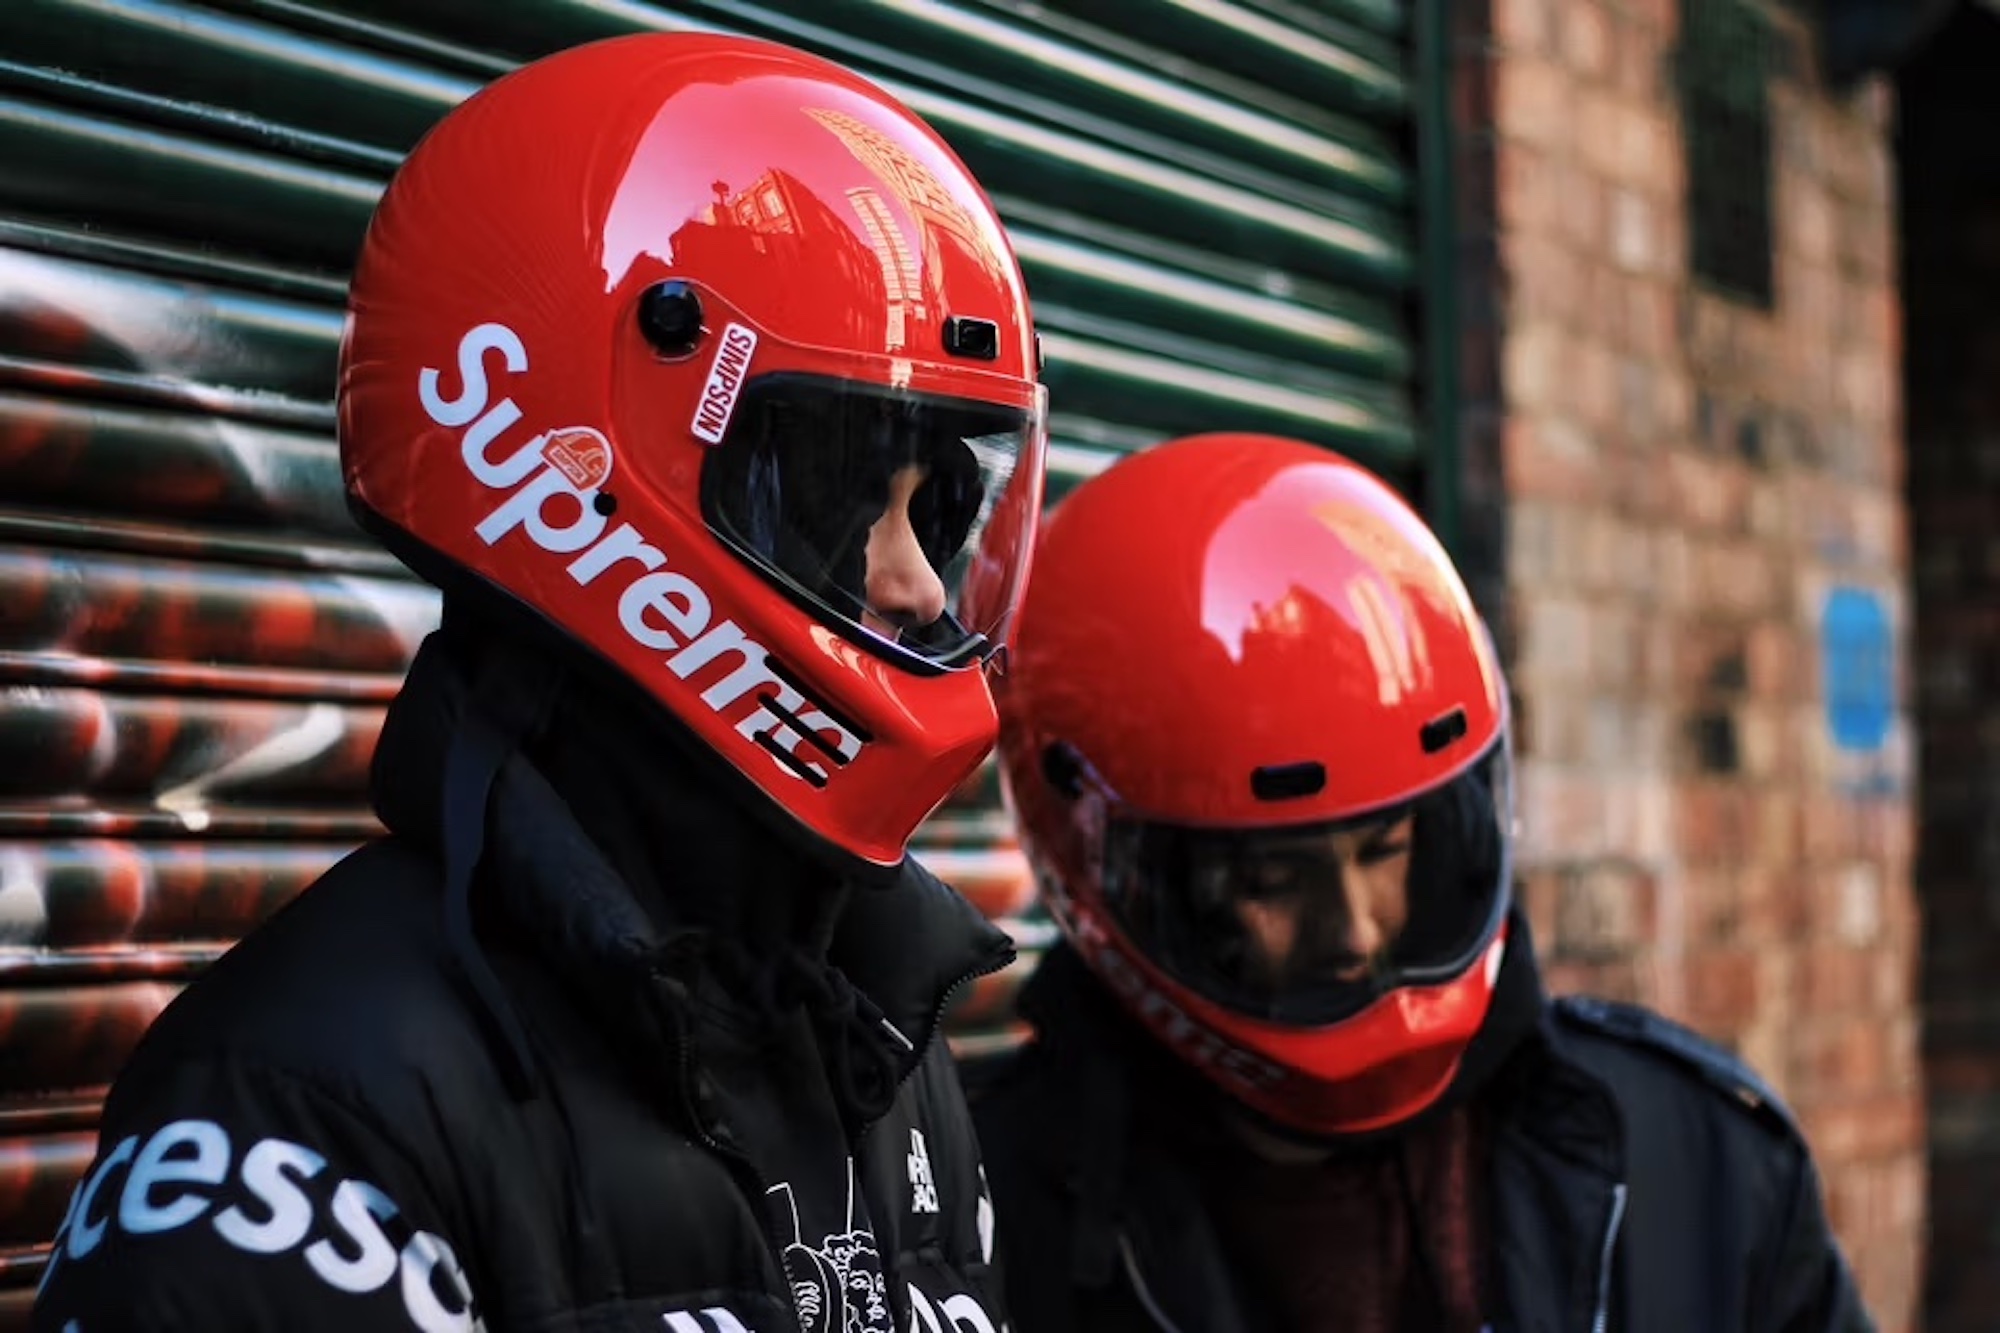 A view of Simpson's Street Bandit, created in collaboration with Supreme. Media sourced from Simpson.